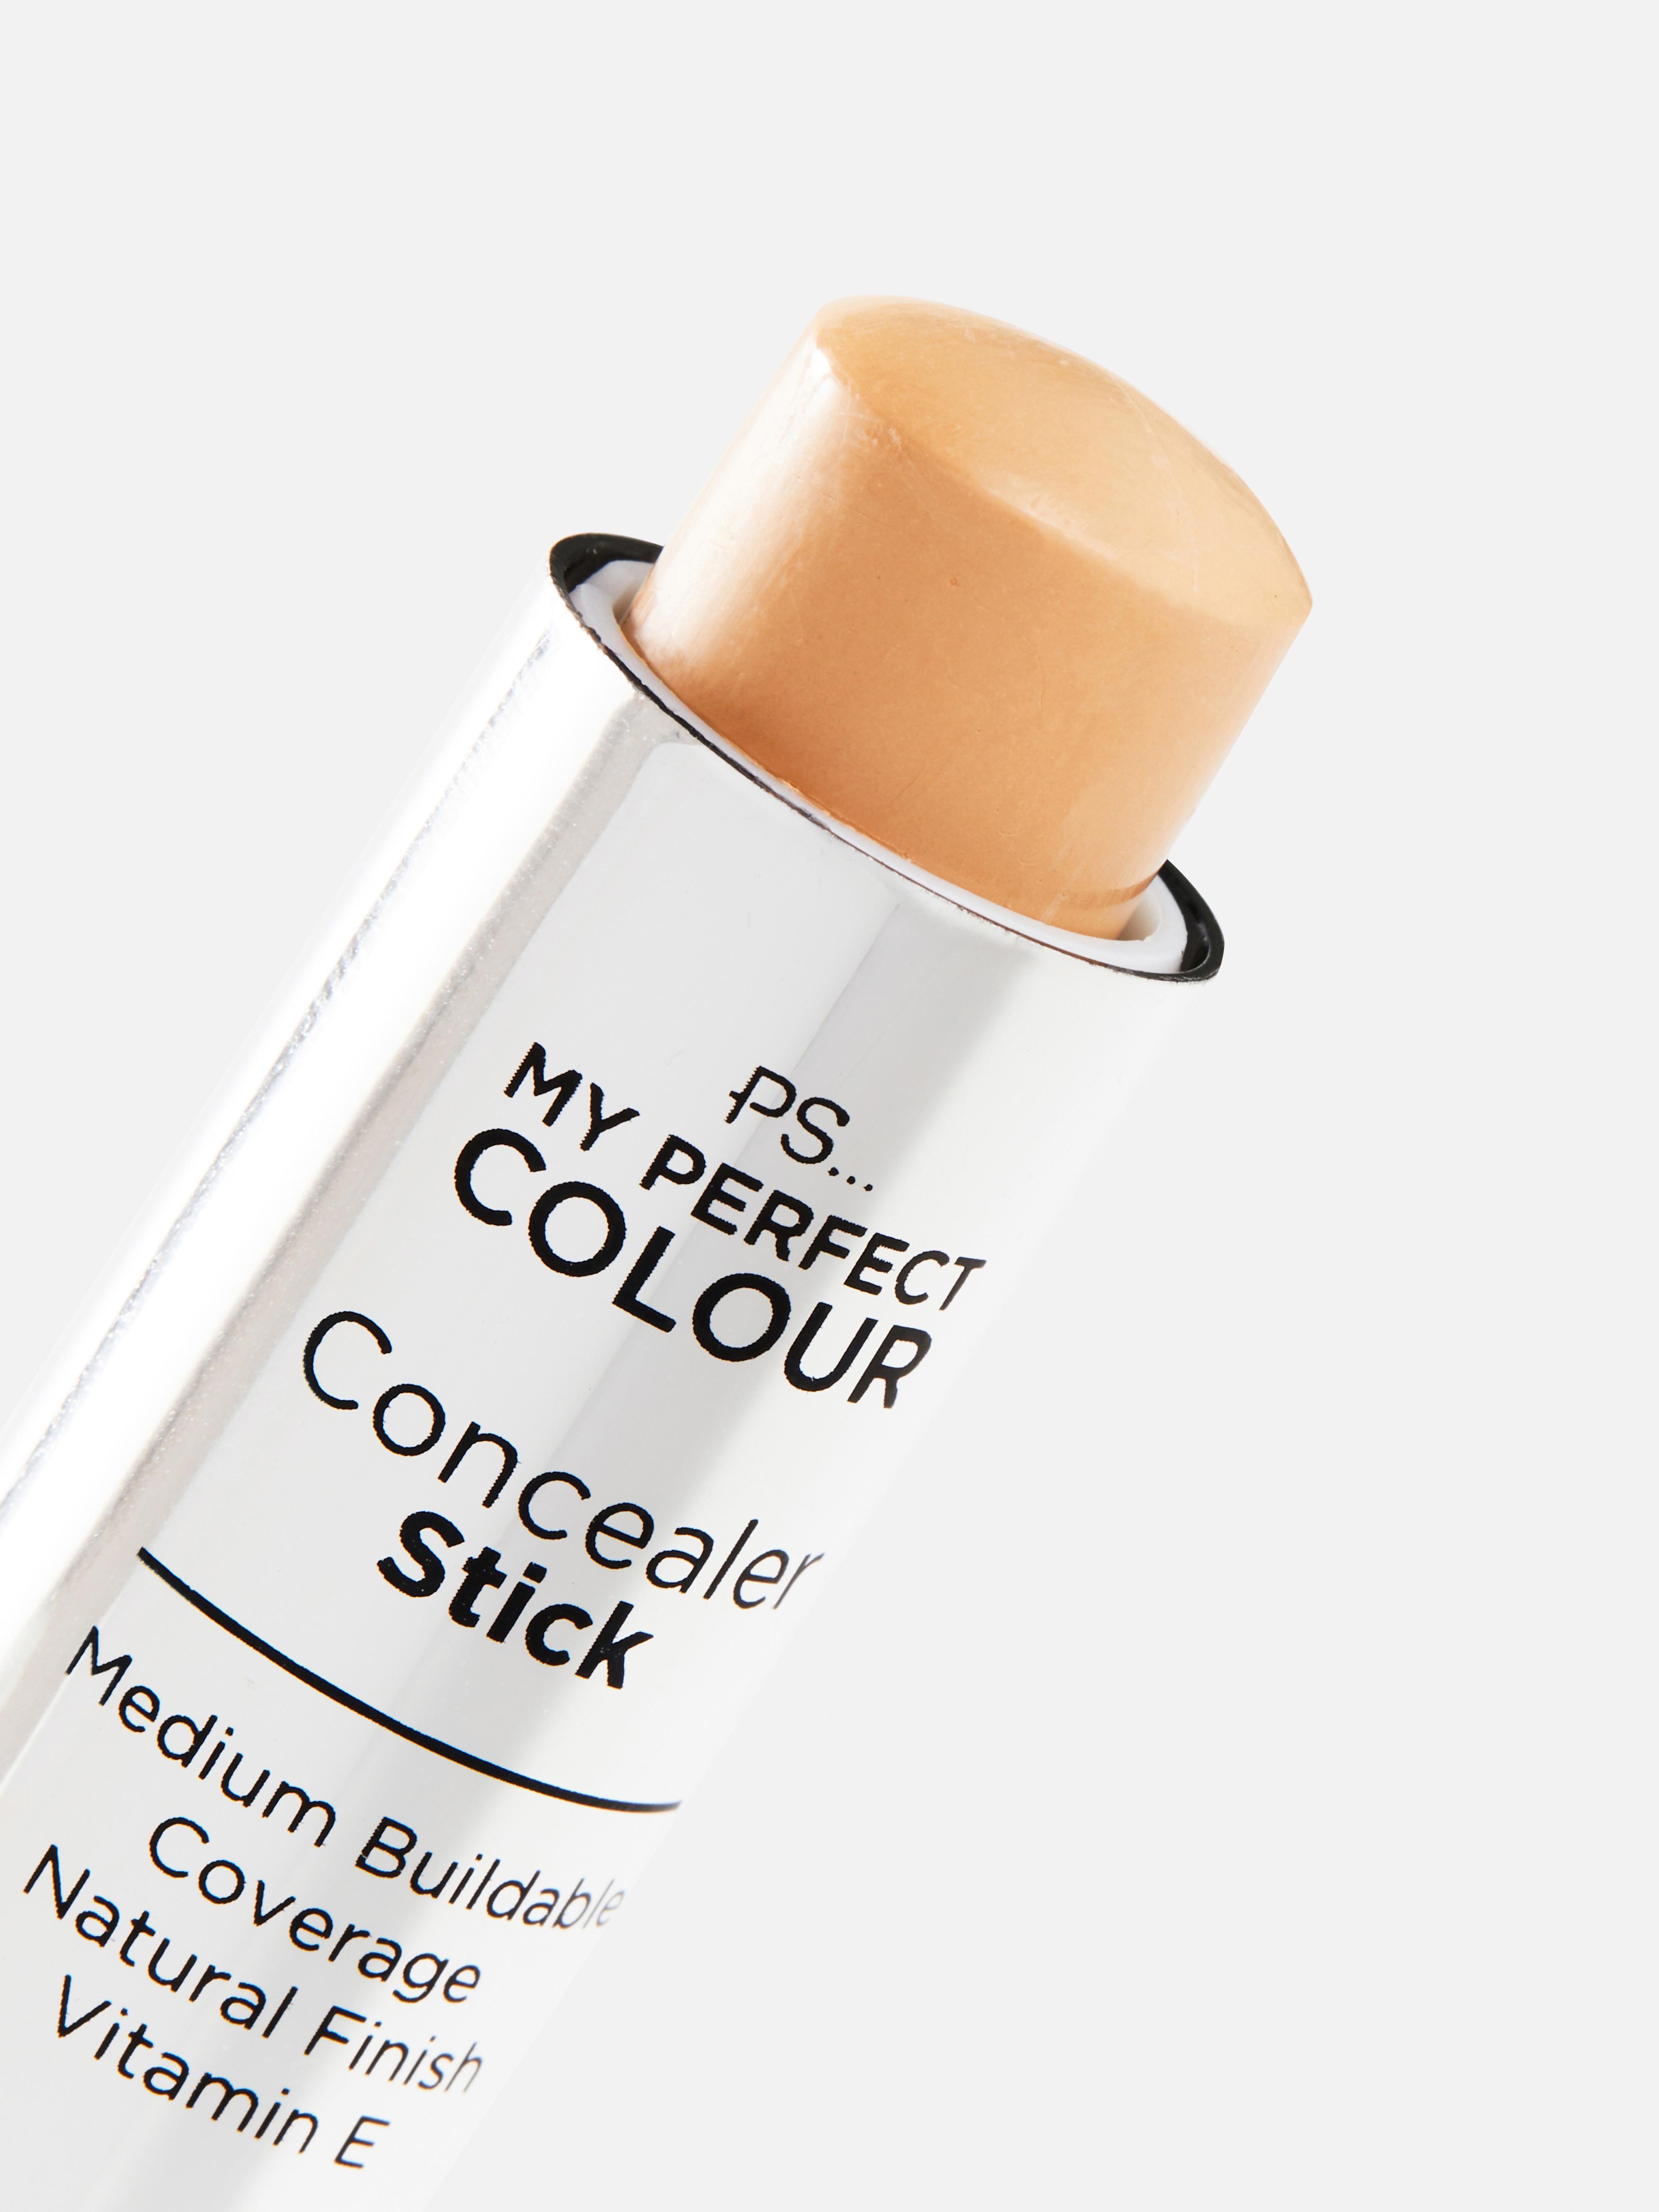 PS... My Perfect Colour Concealer Stick